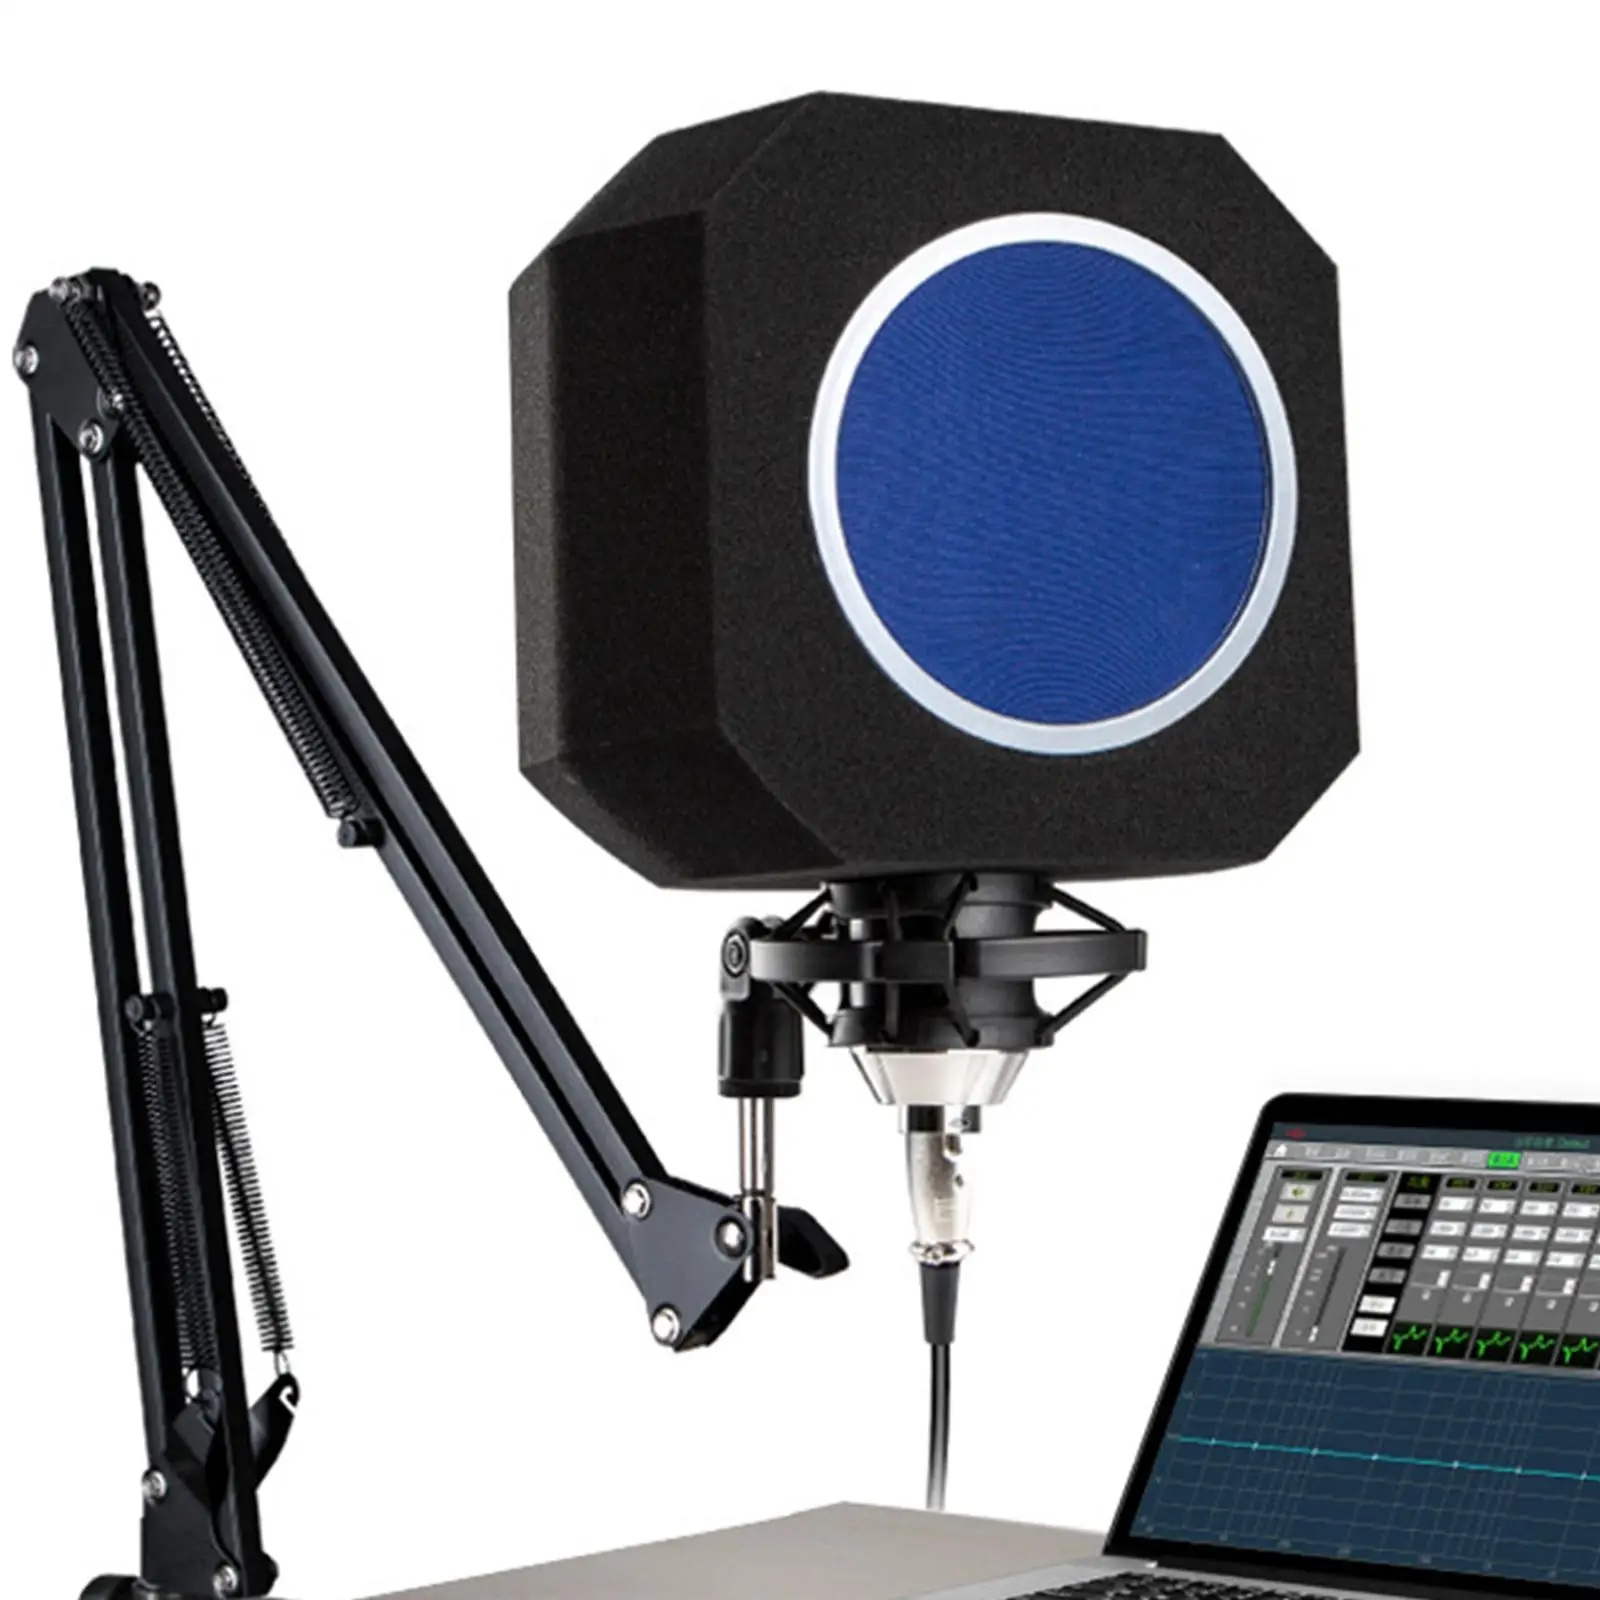 Microphone Sponge Portable Professional Microphone Wind Screen Sound-Absorbing Reflection Filter for Studio Recording